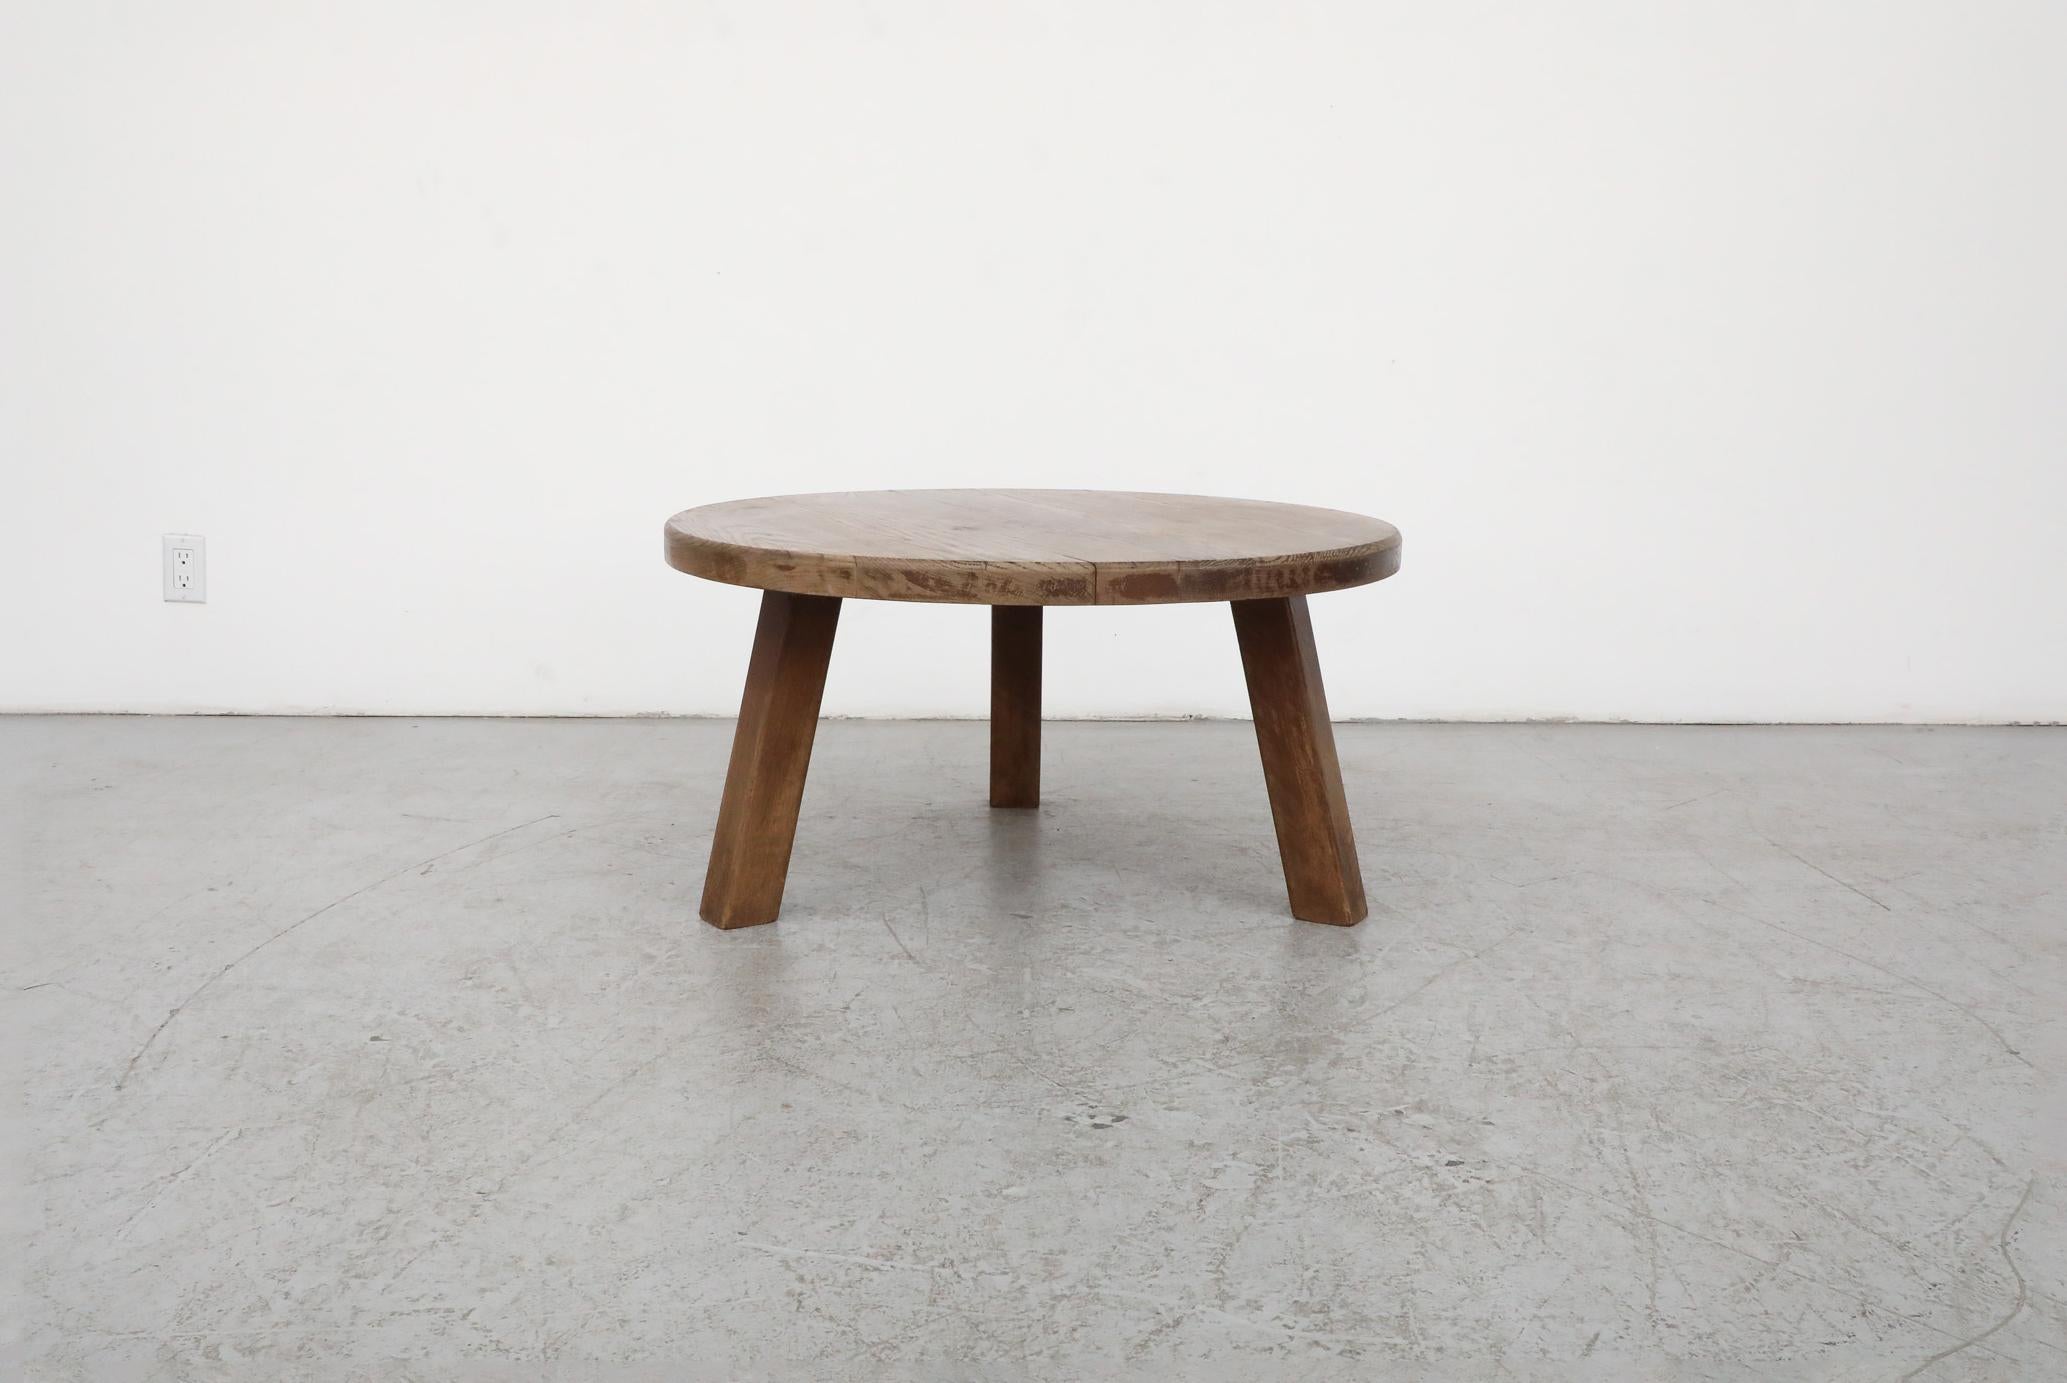 Mid-Century, Brutalist Pierre Chapo style coffee table. Made from solid, well aged oak, with a generous, round top and tripod legs. In original condition with visible wear, including some natural cracking. Wear is consistent with its age and use.